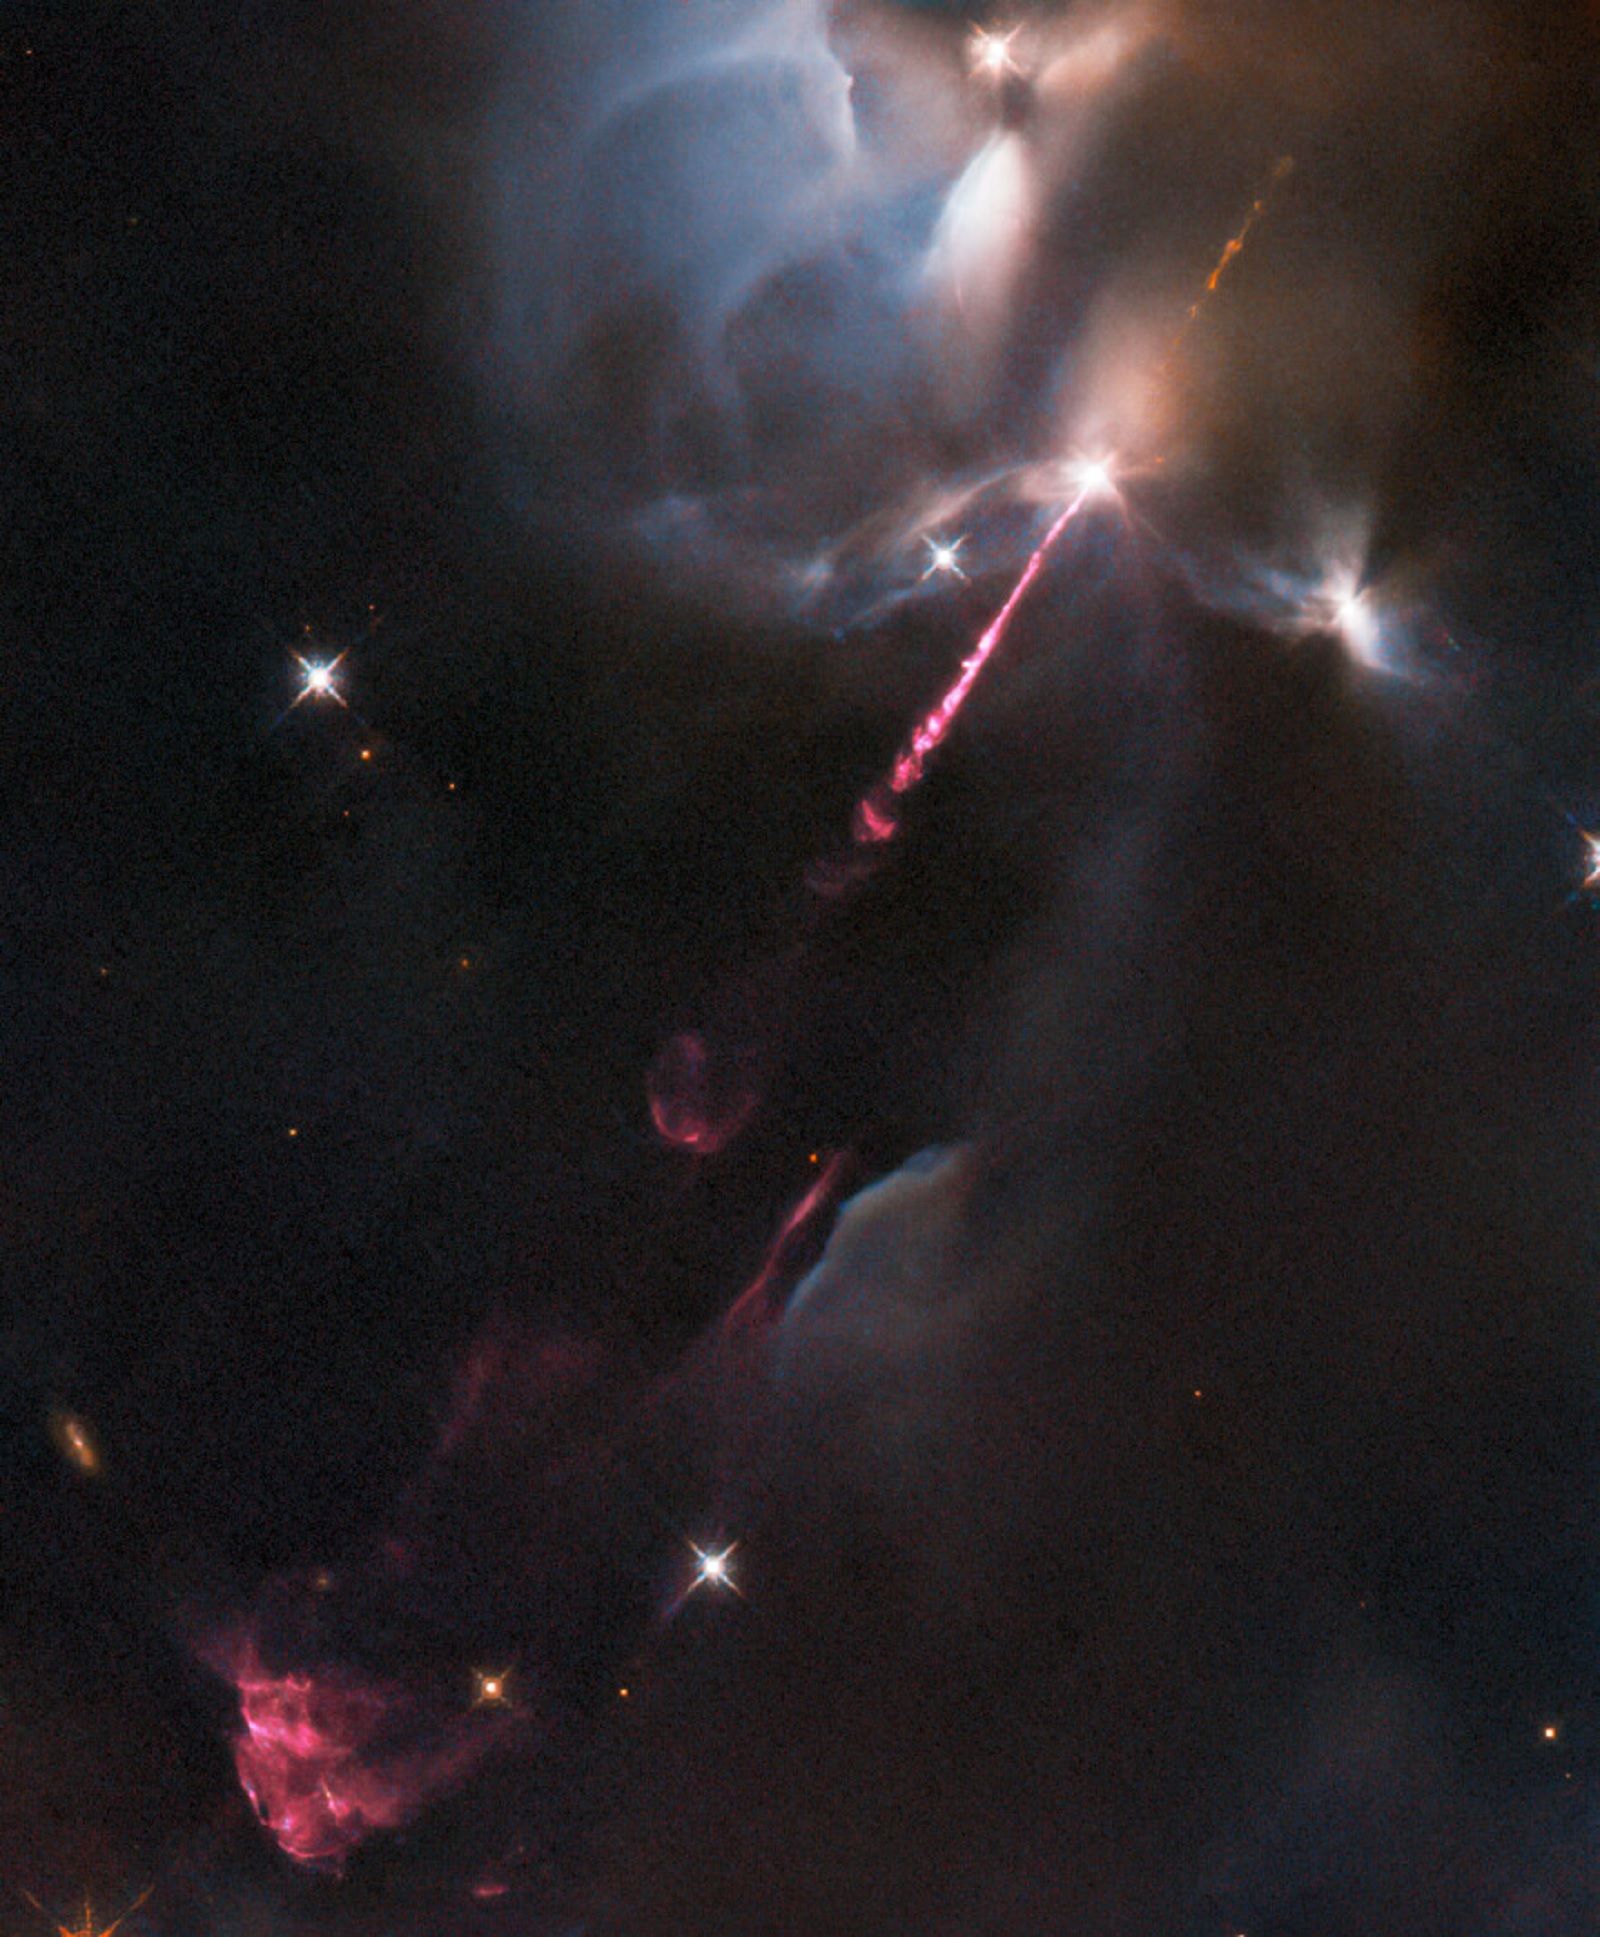 astounding images from the depths of the universe courtesy of the hubble space telescope photo 46